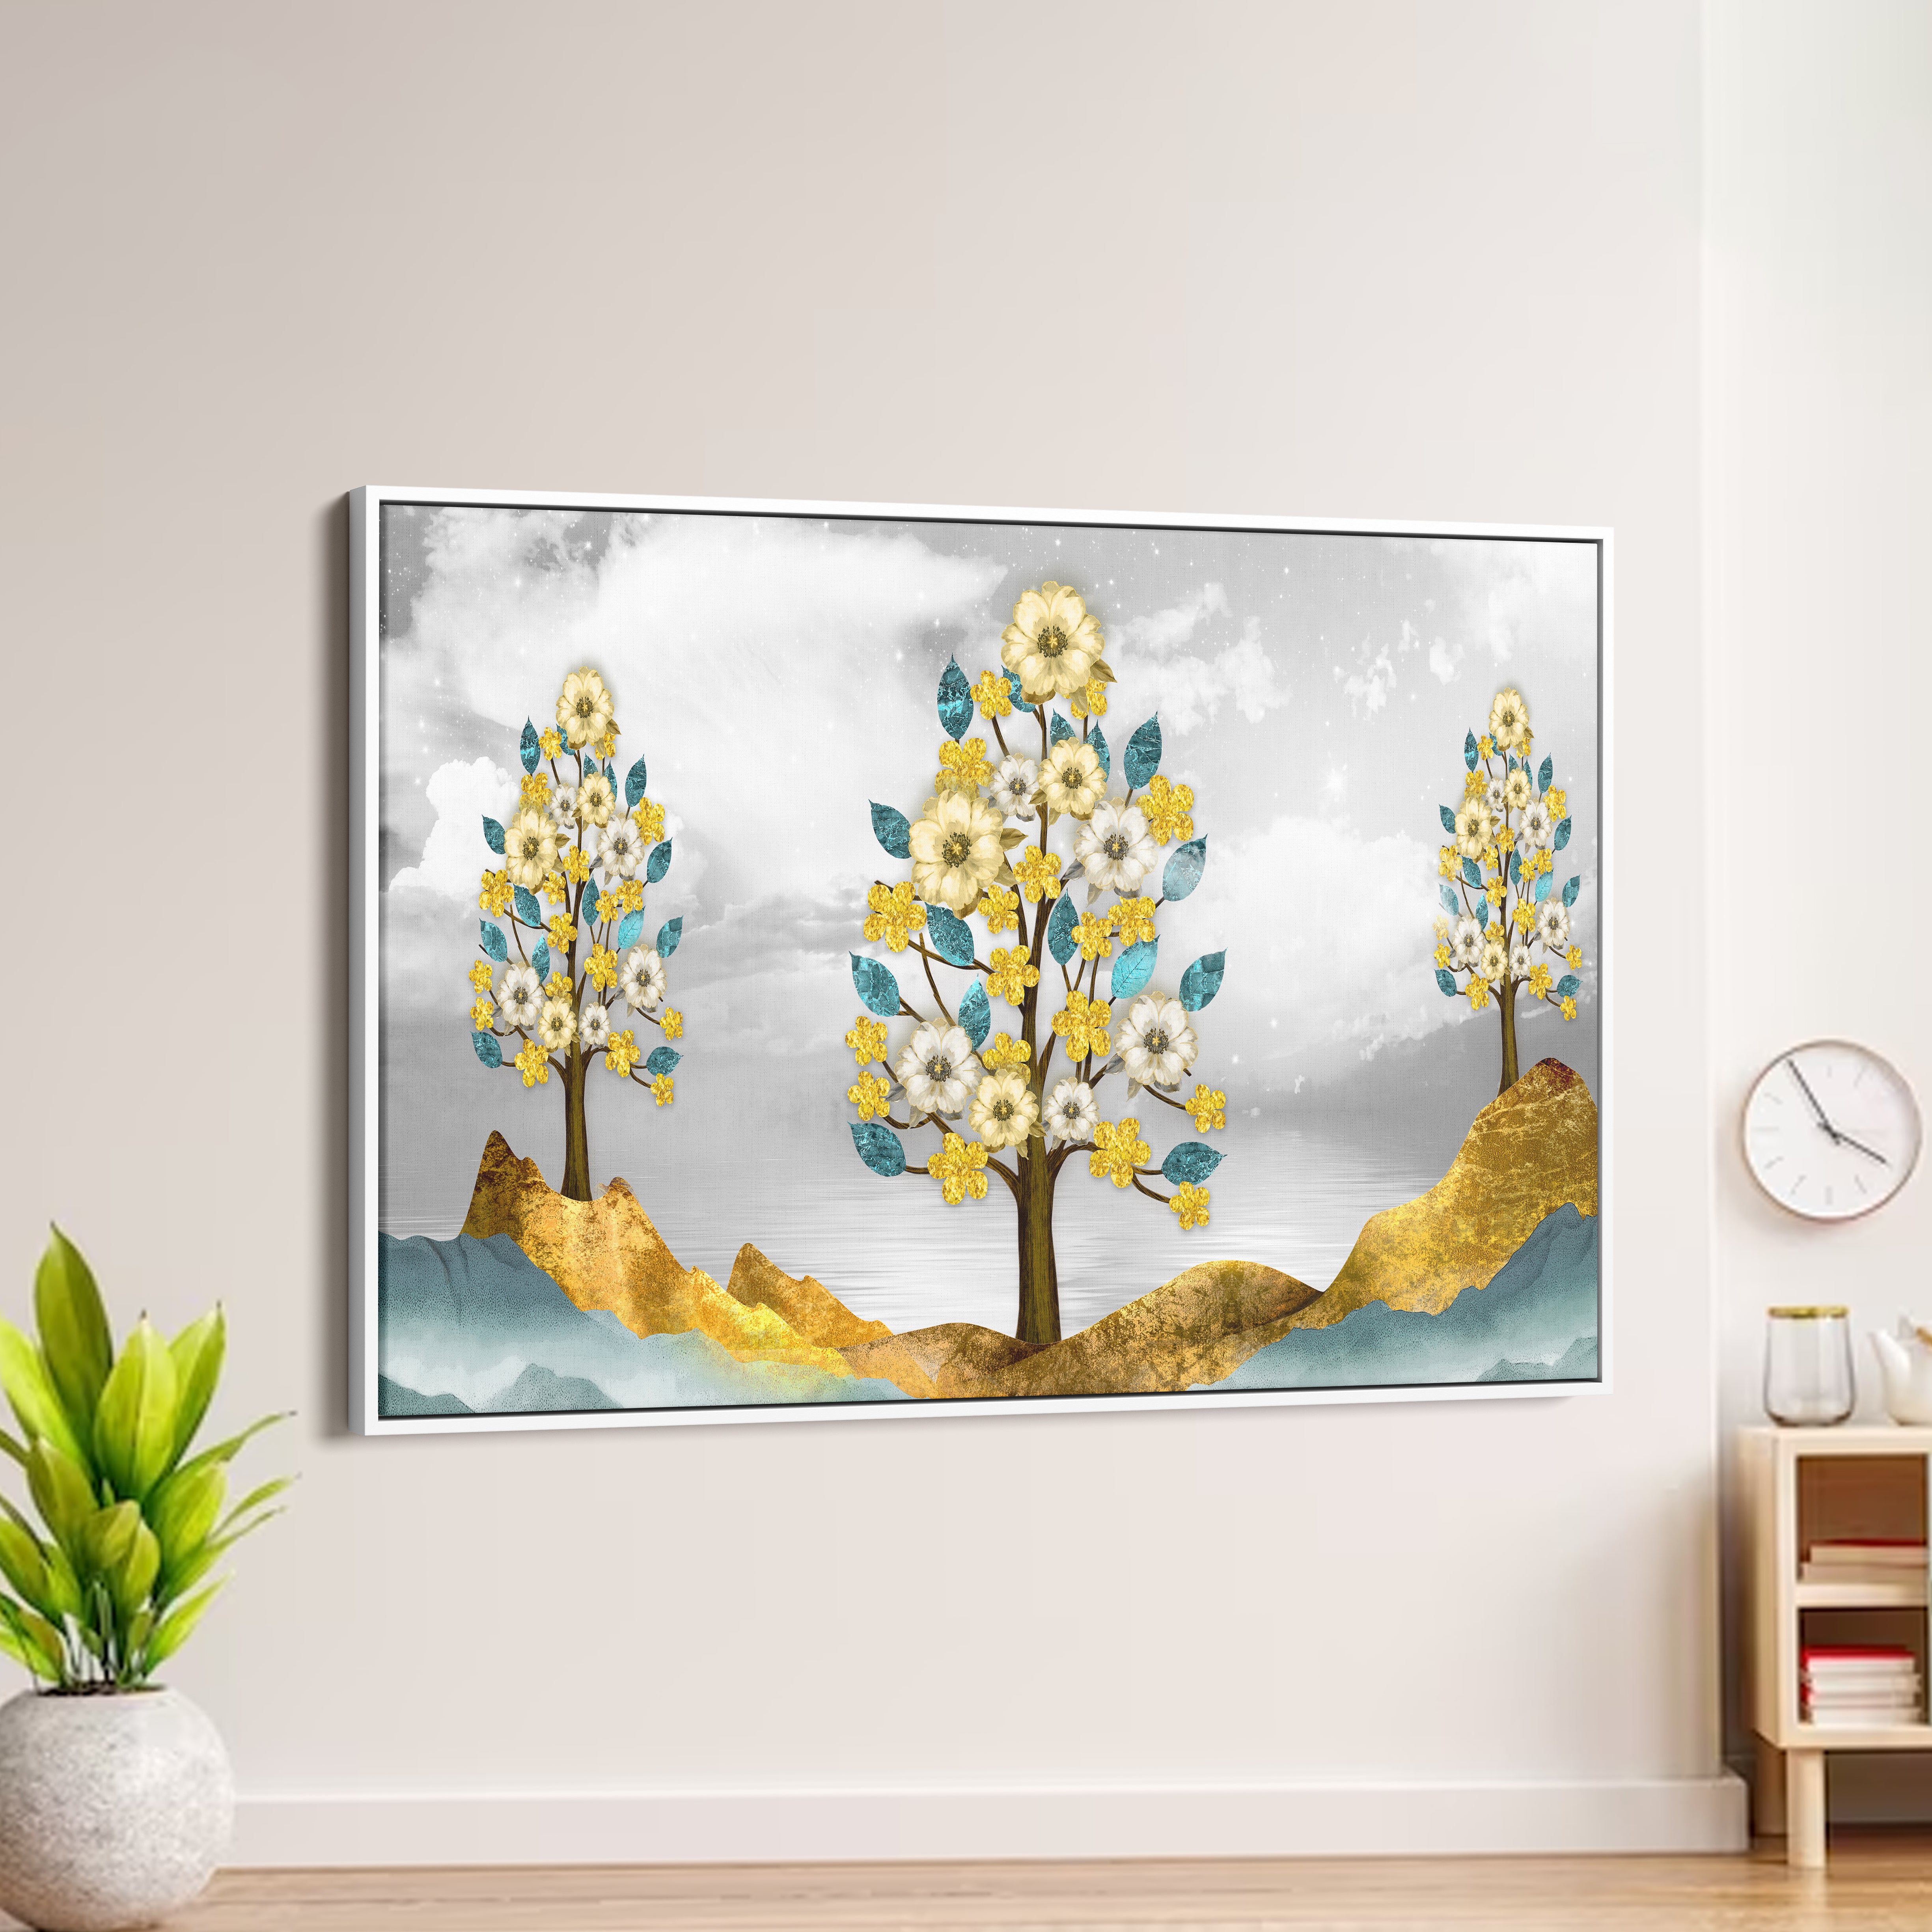 Beautiful Golden Flowers and Turquoise Mountains Canvas Wall Painting